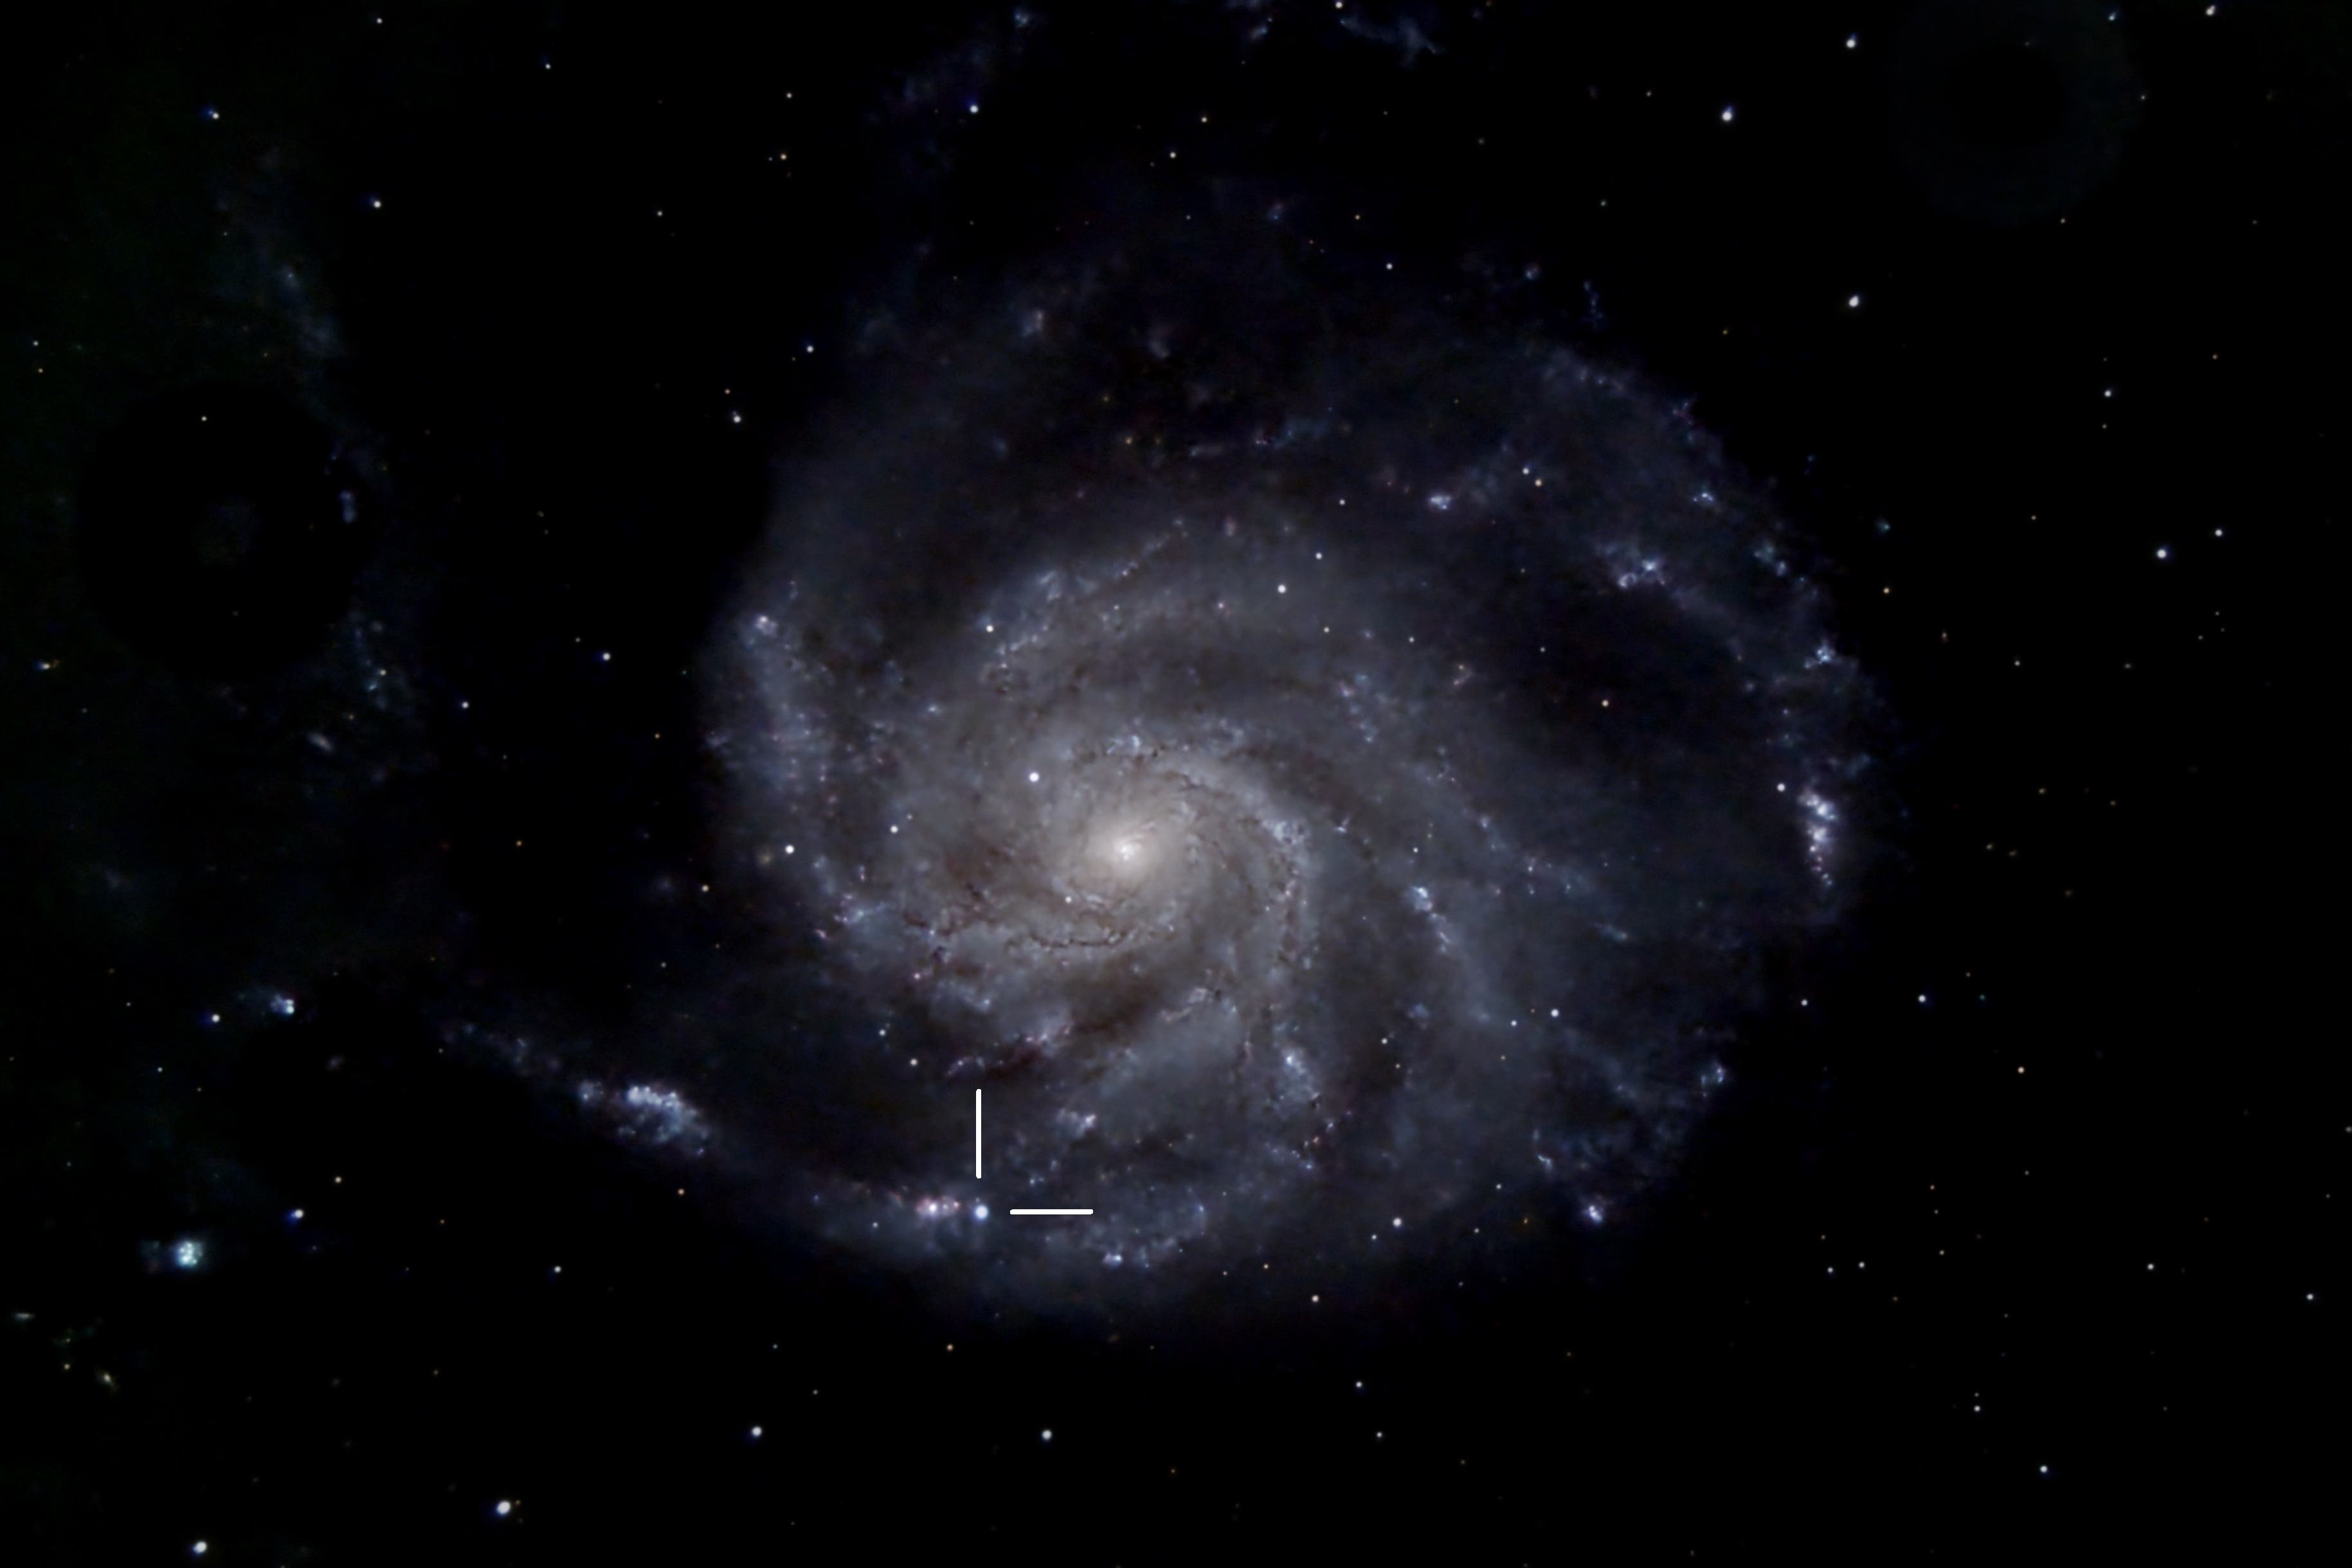 New supernova in the Pinwheel Galaxy now visible with a telescope